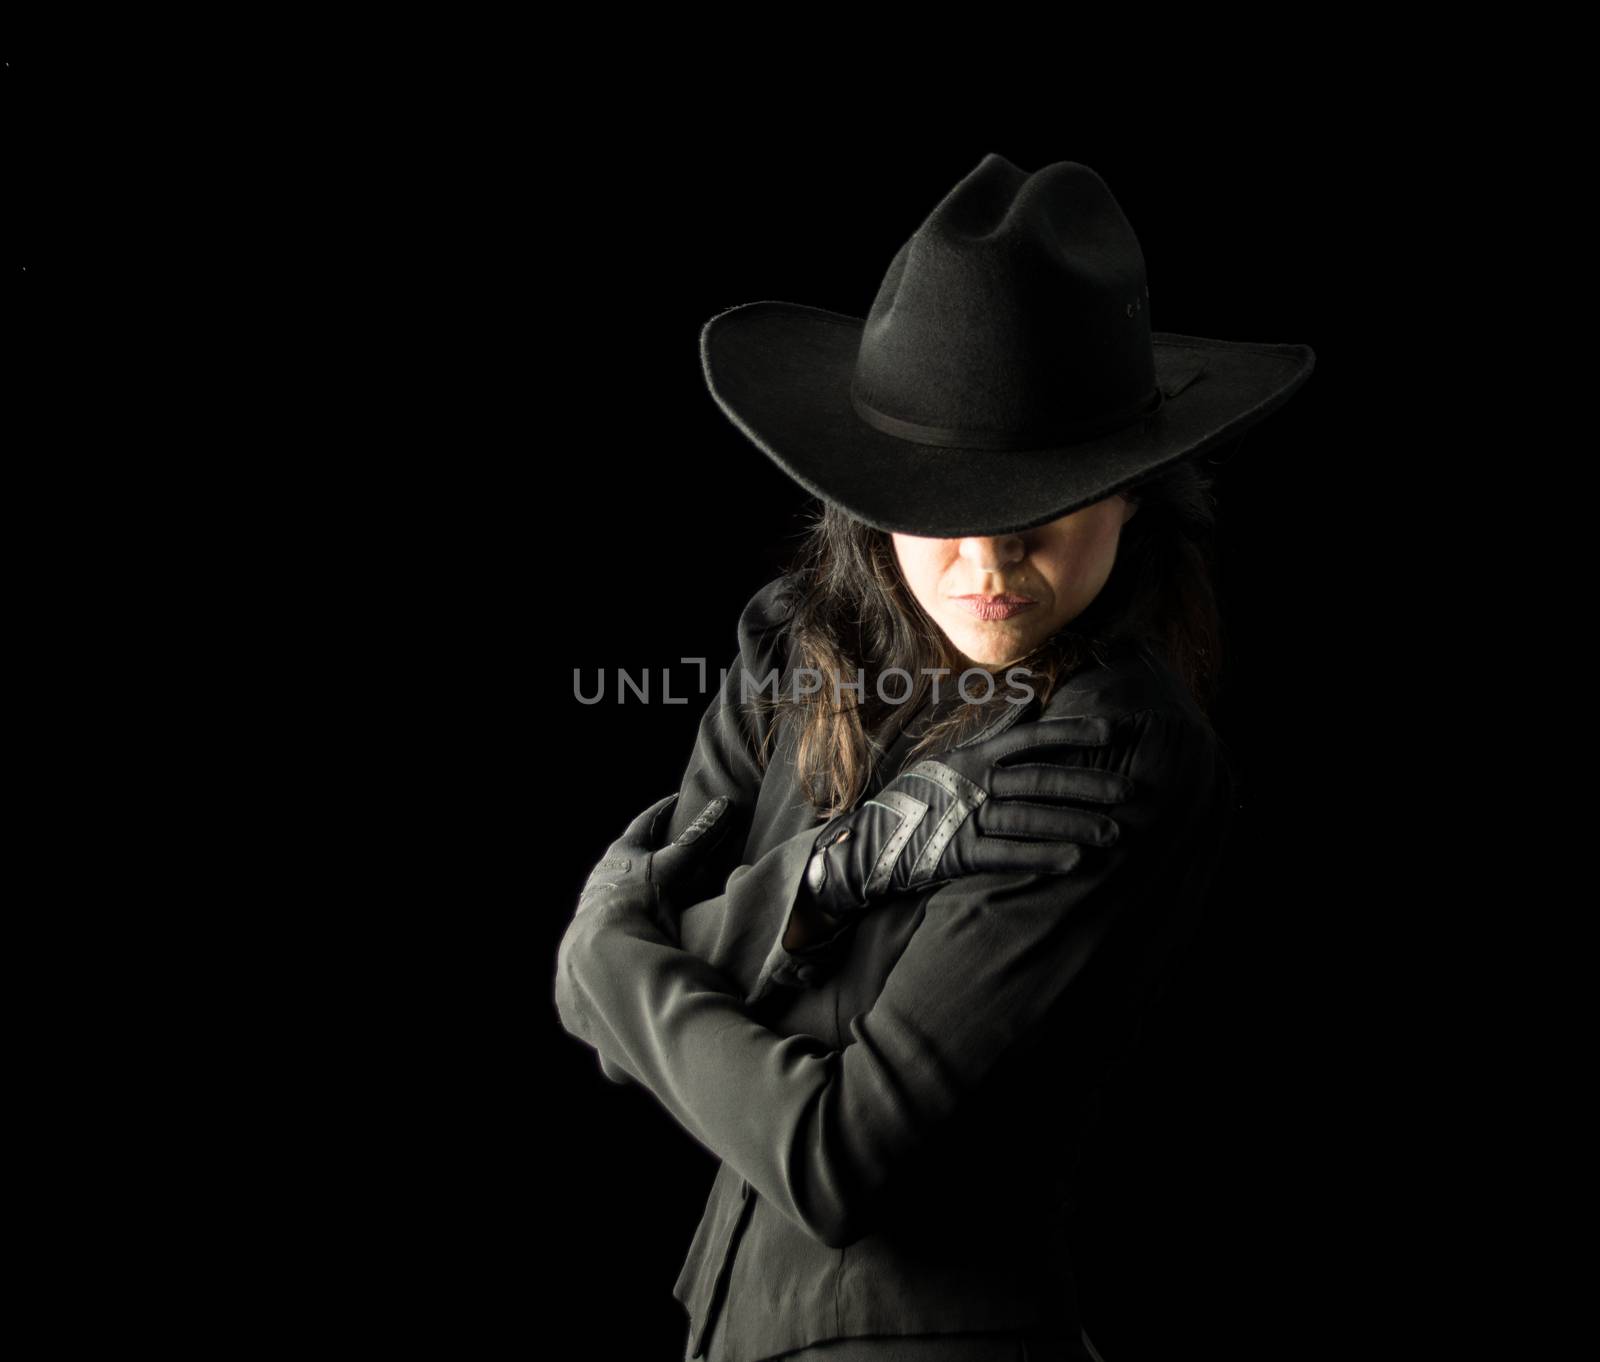 Brunette woman in black dress and black gloves, wearing a black cowboy hat, holding her arms across her body and looking downward, with her face partially hidden by the hat.